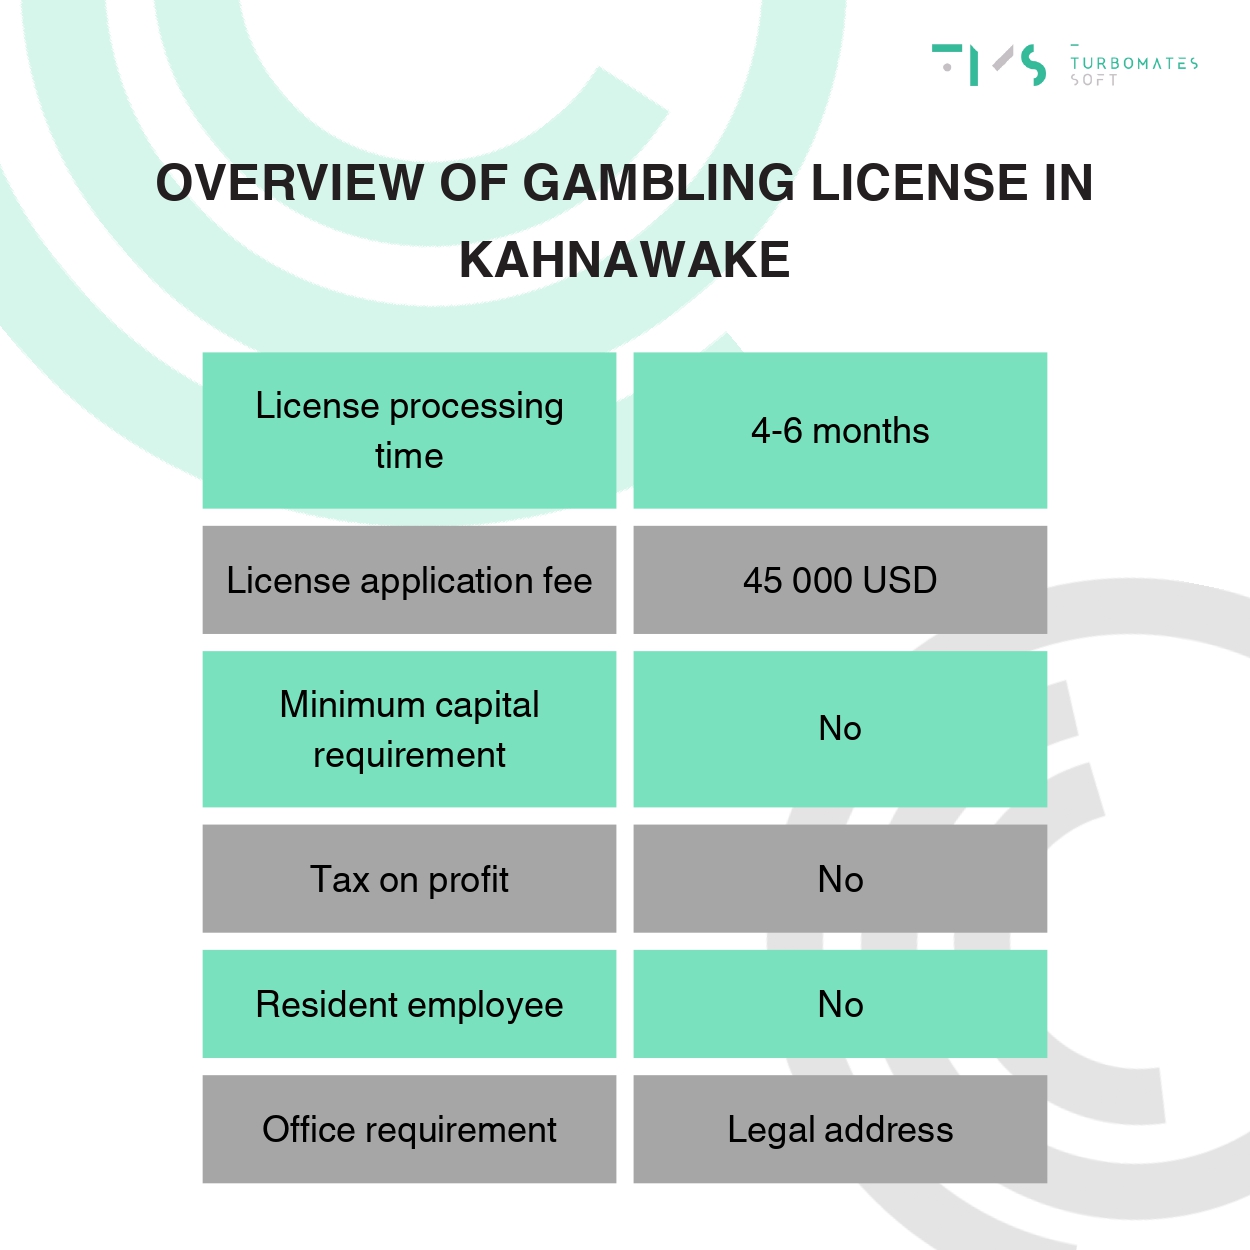 Overview of Gambling license in Kahnawake